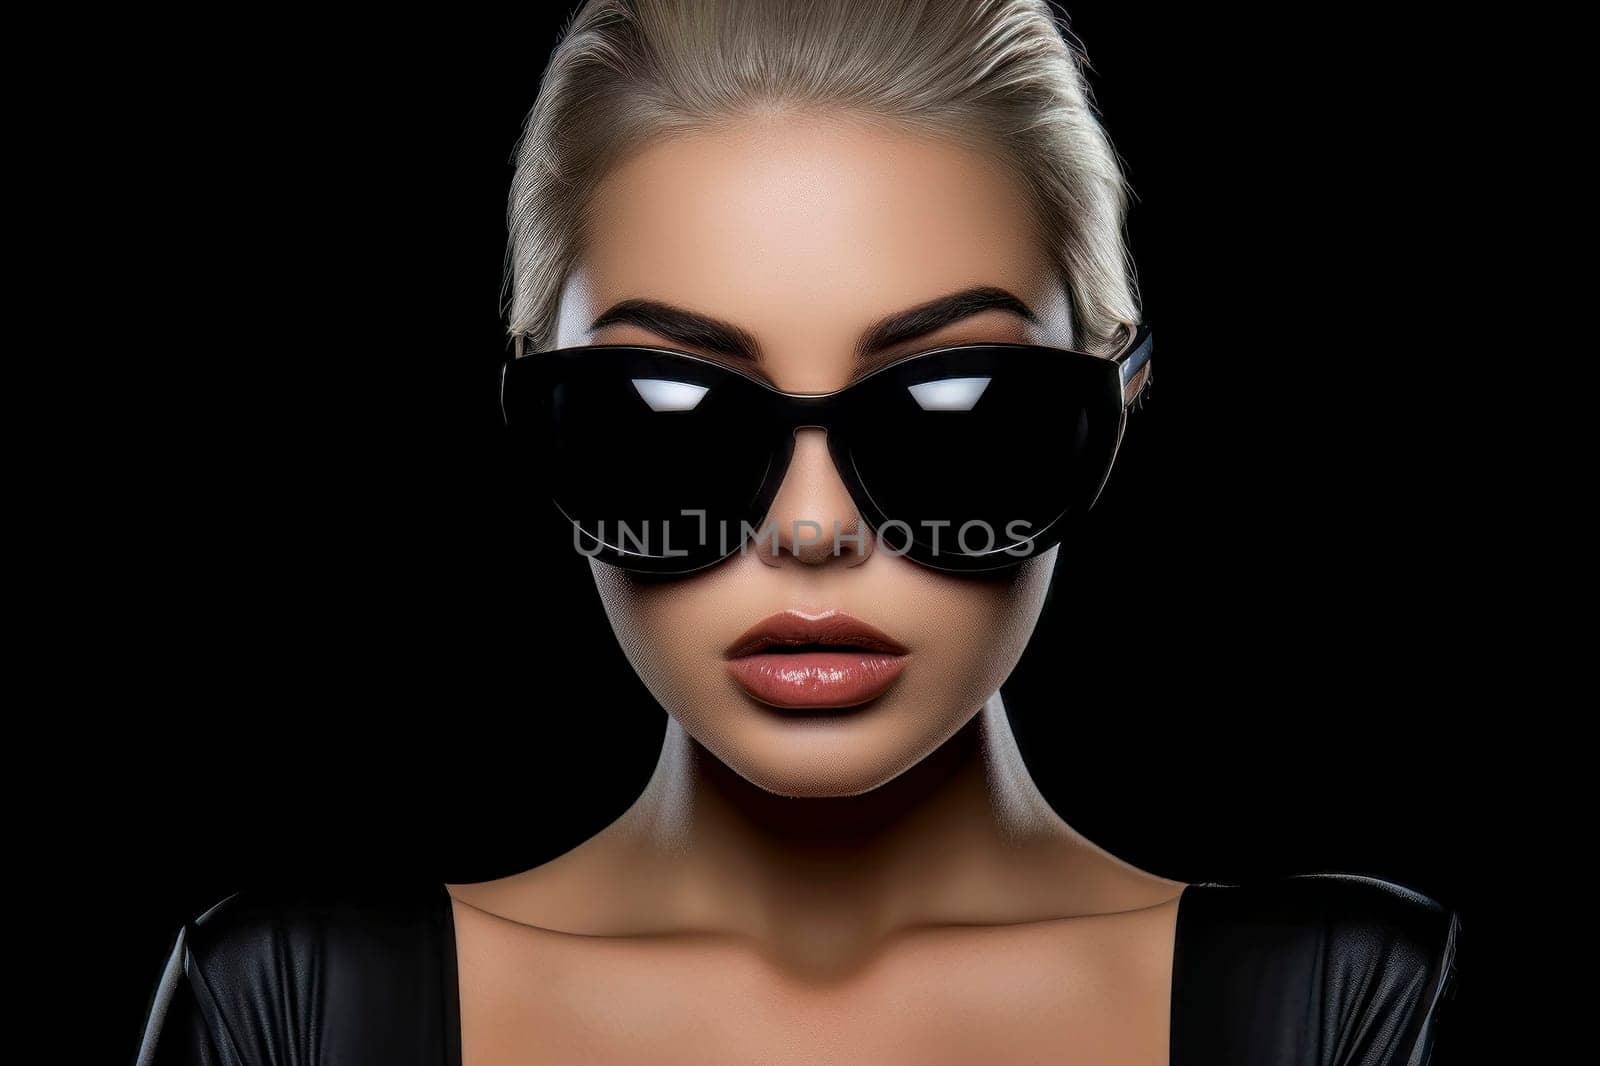 Fashion forward portrait of a stylish young woman embodying contemporary trends.